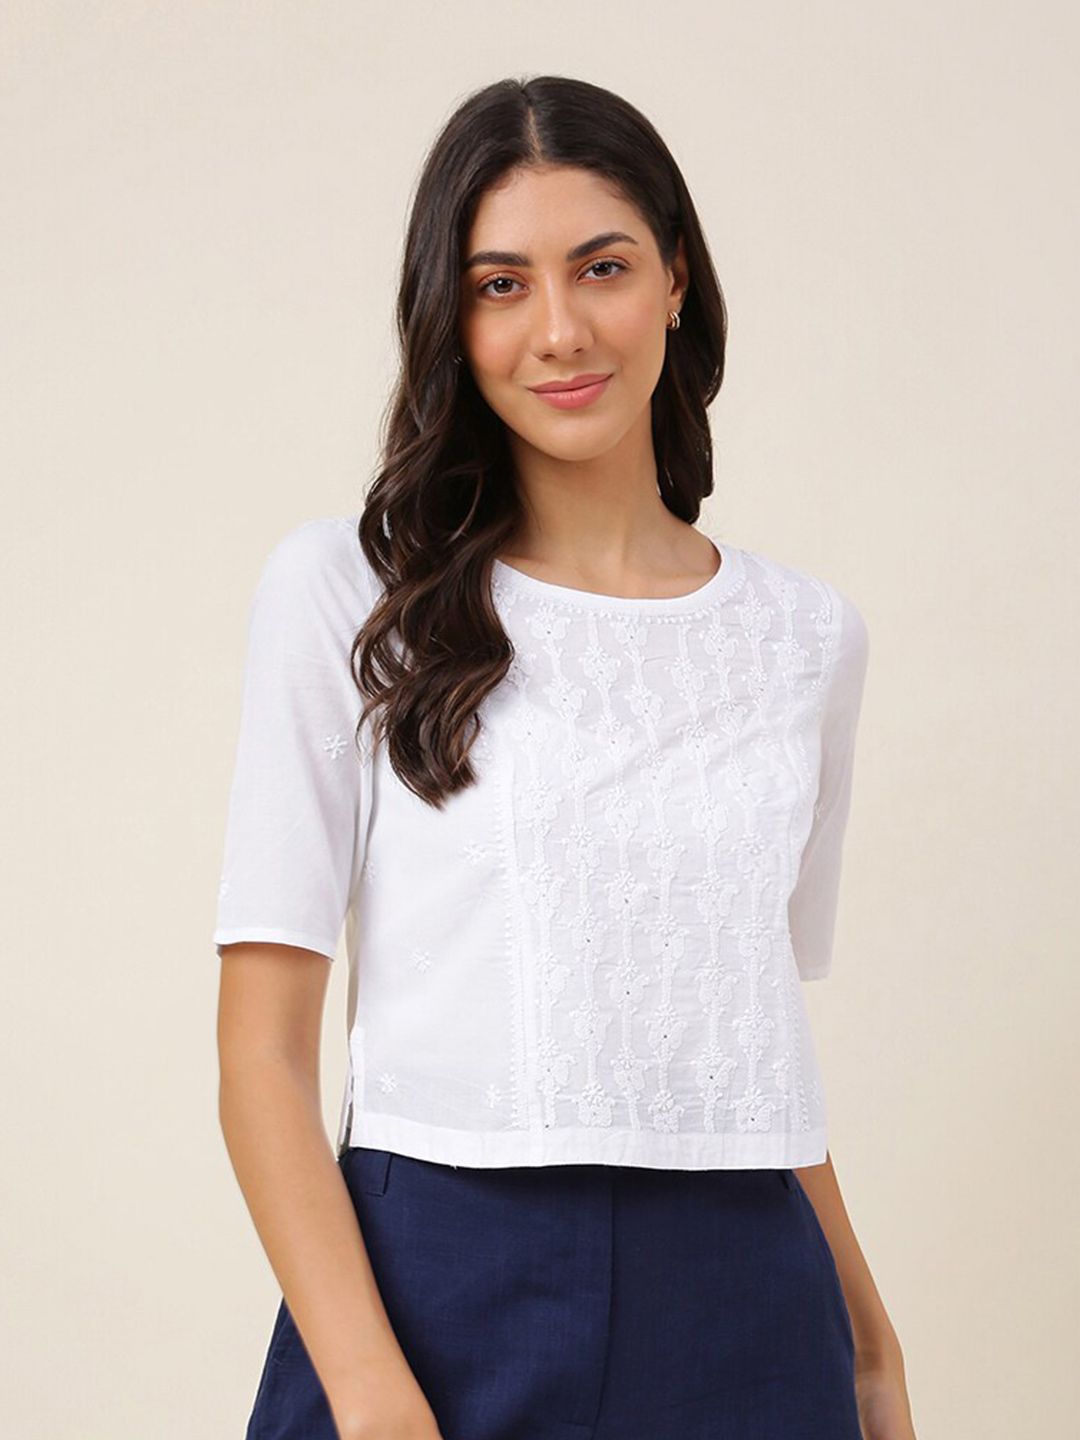 Fabindia White Ethnic Embroidered Short Sleeves Pure Cotton Crop Top Price in India